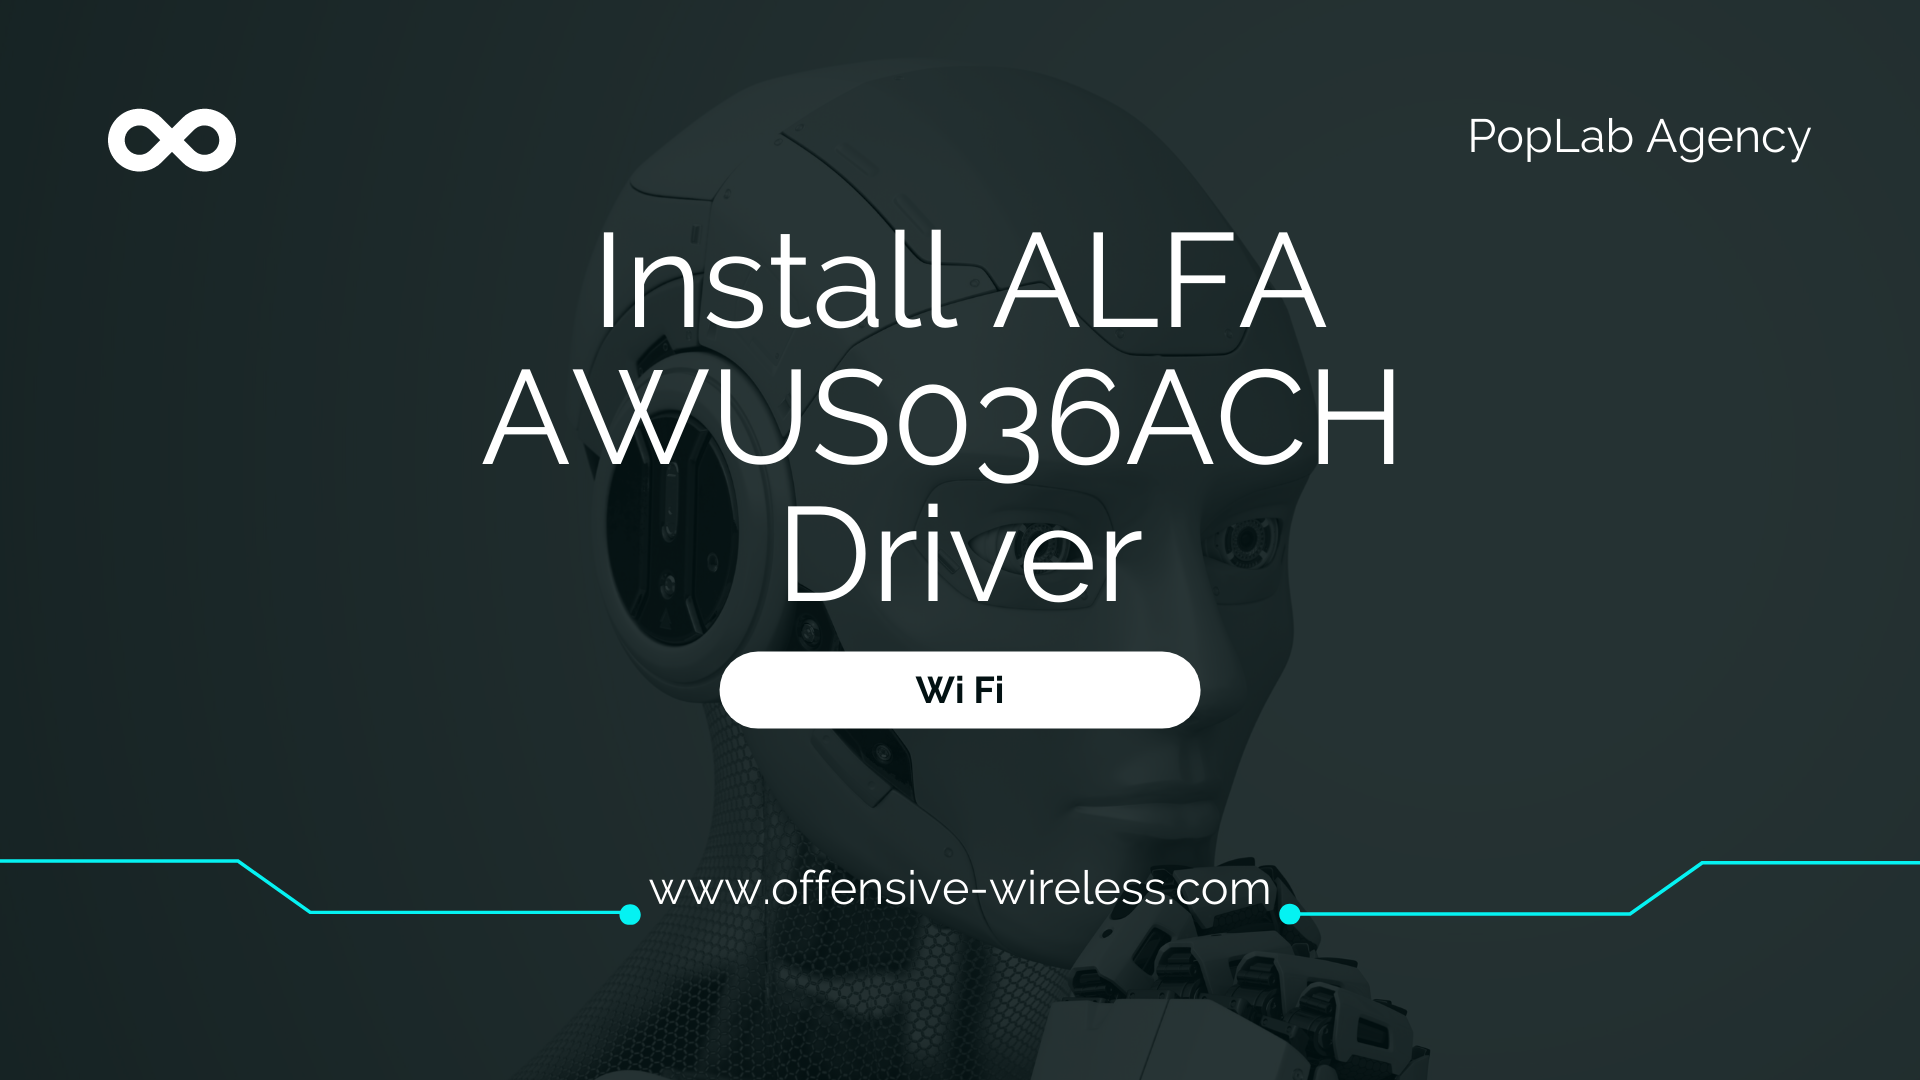 How to Install ALFA AC1200 AWUS036ACH Driver